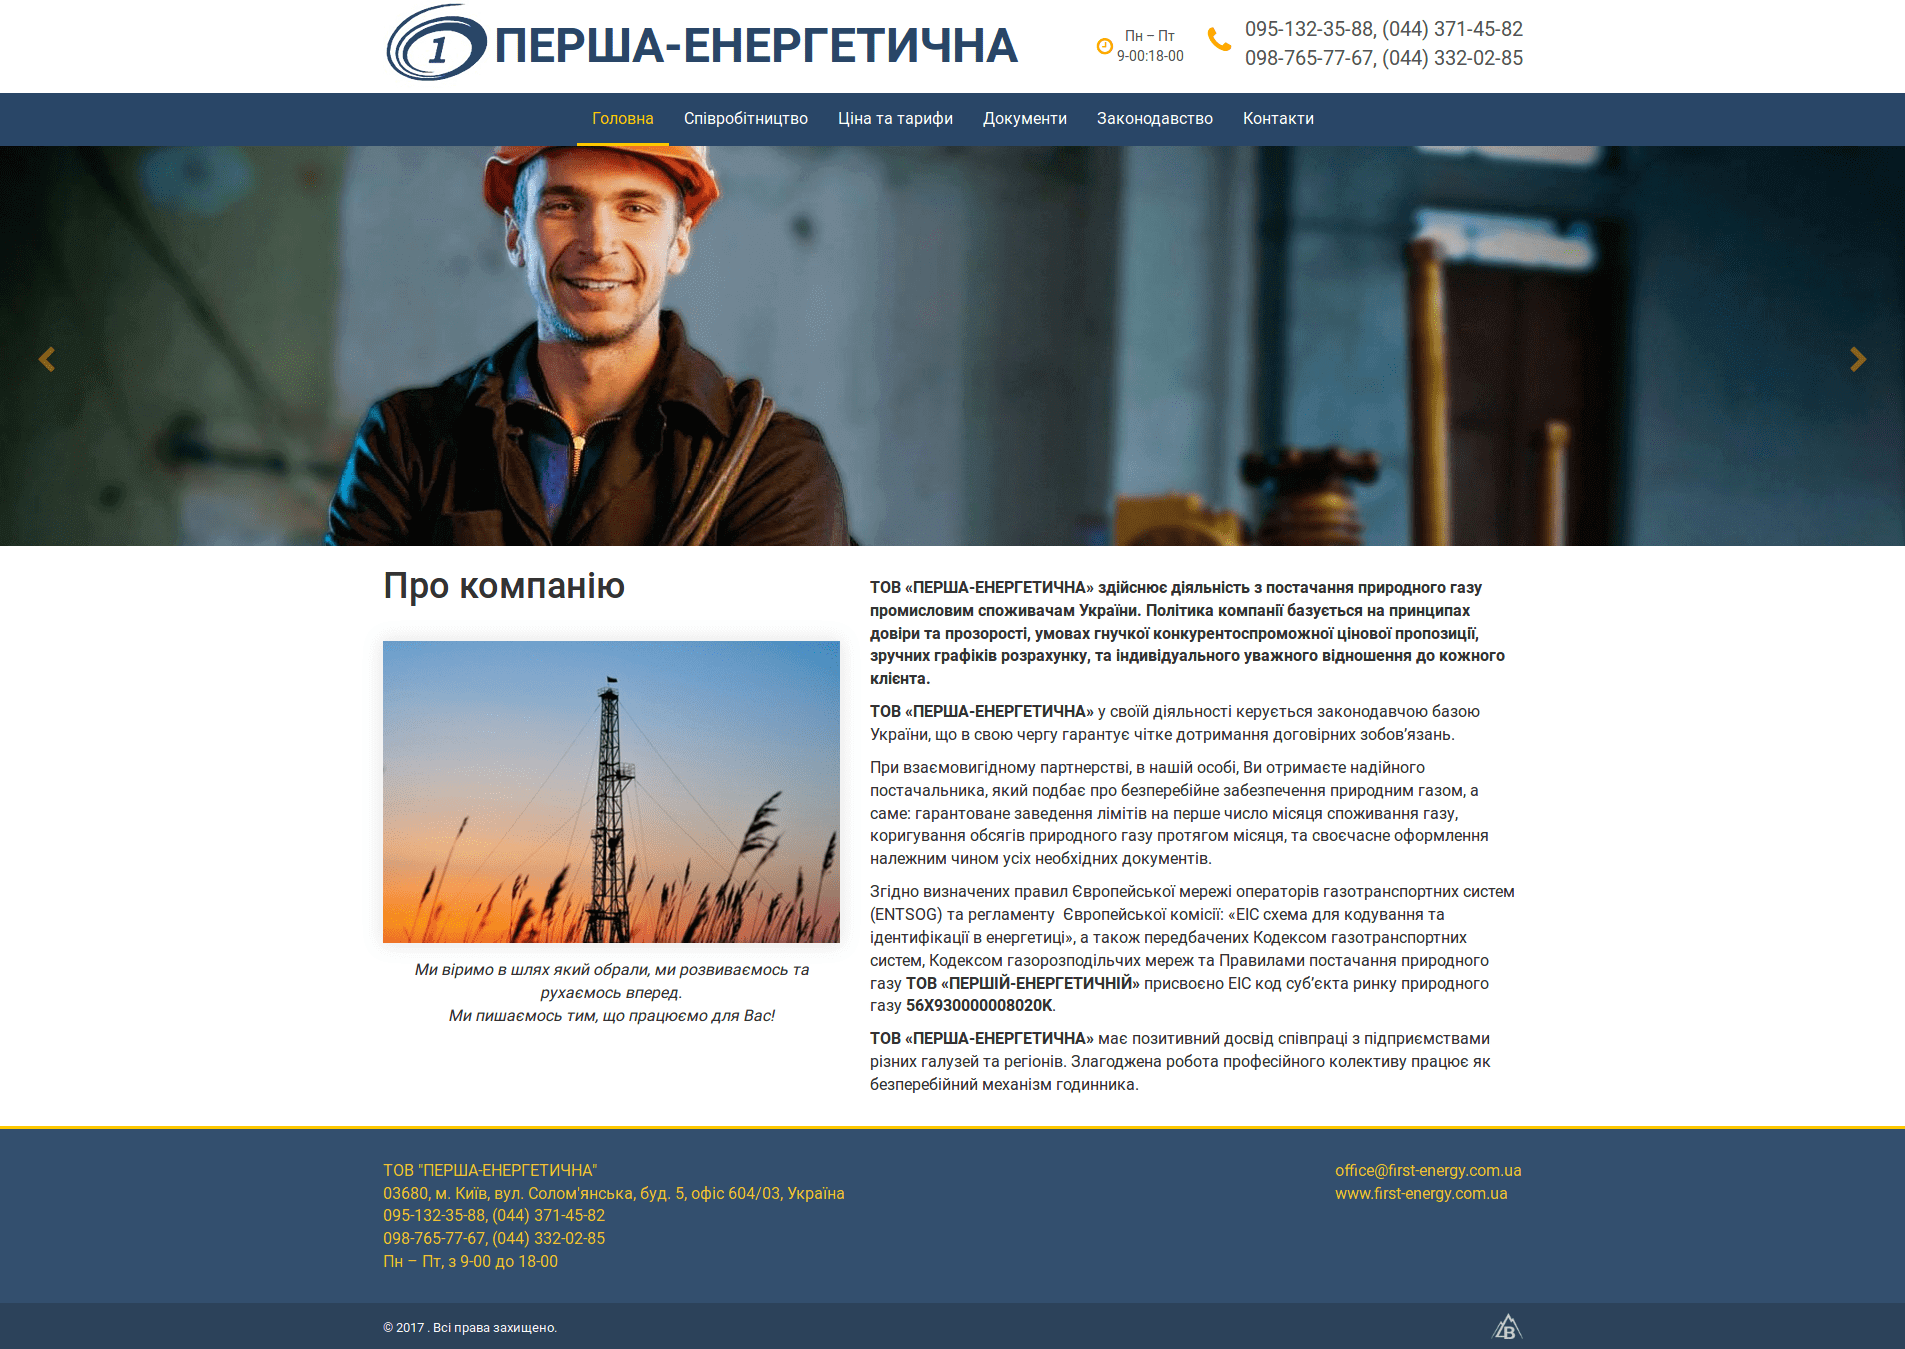 Homepage of "First-energy" company site